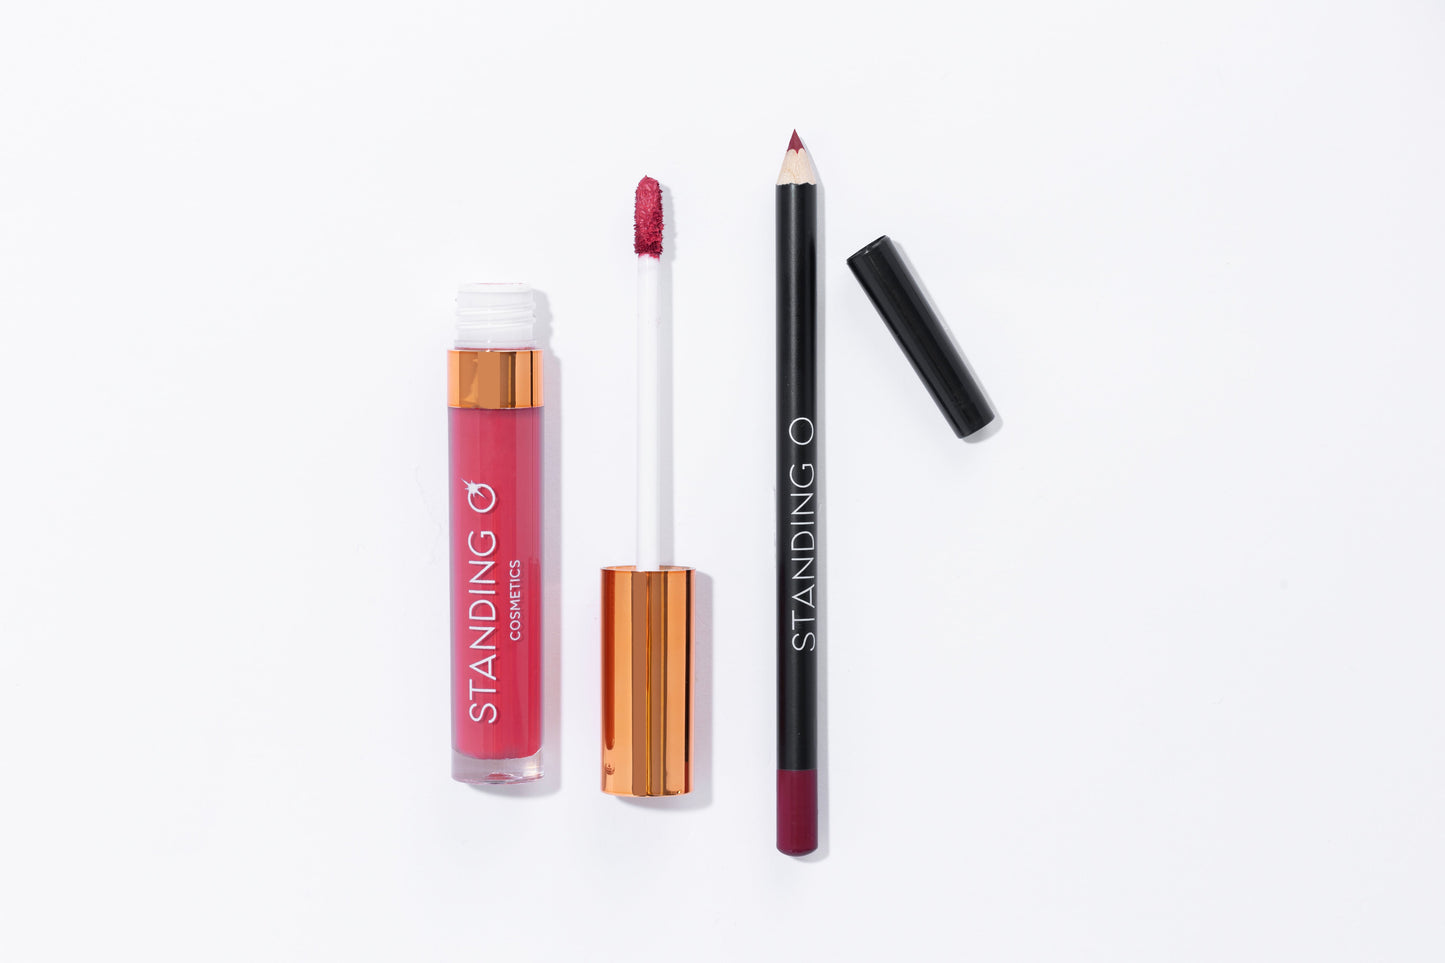 Standing O Poise Pink lip duo kit. Includes Lip Liner and Lip Stick.